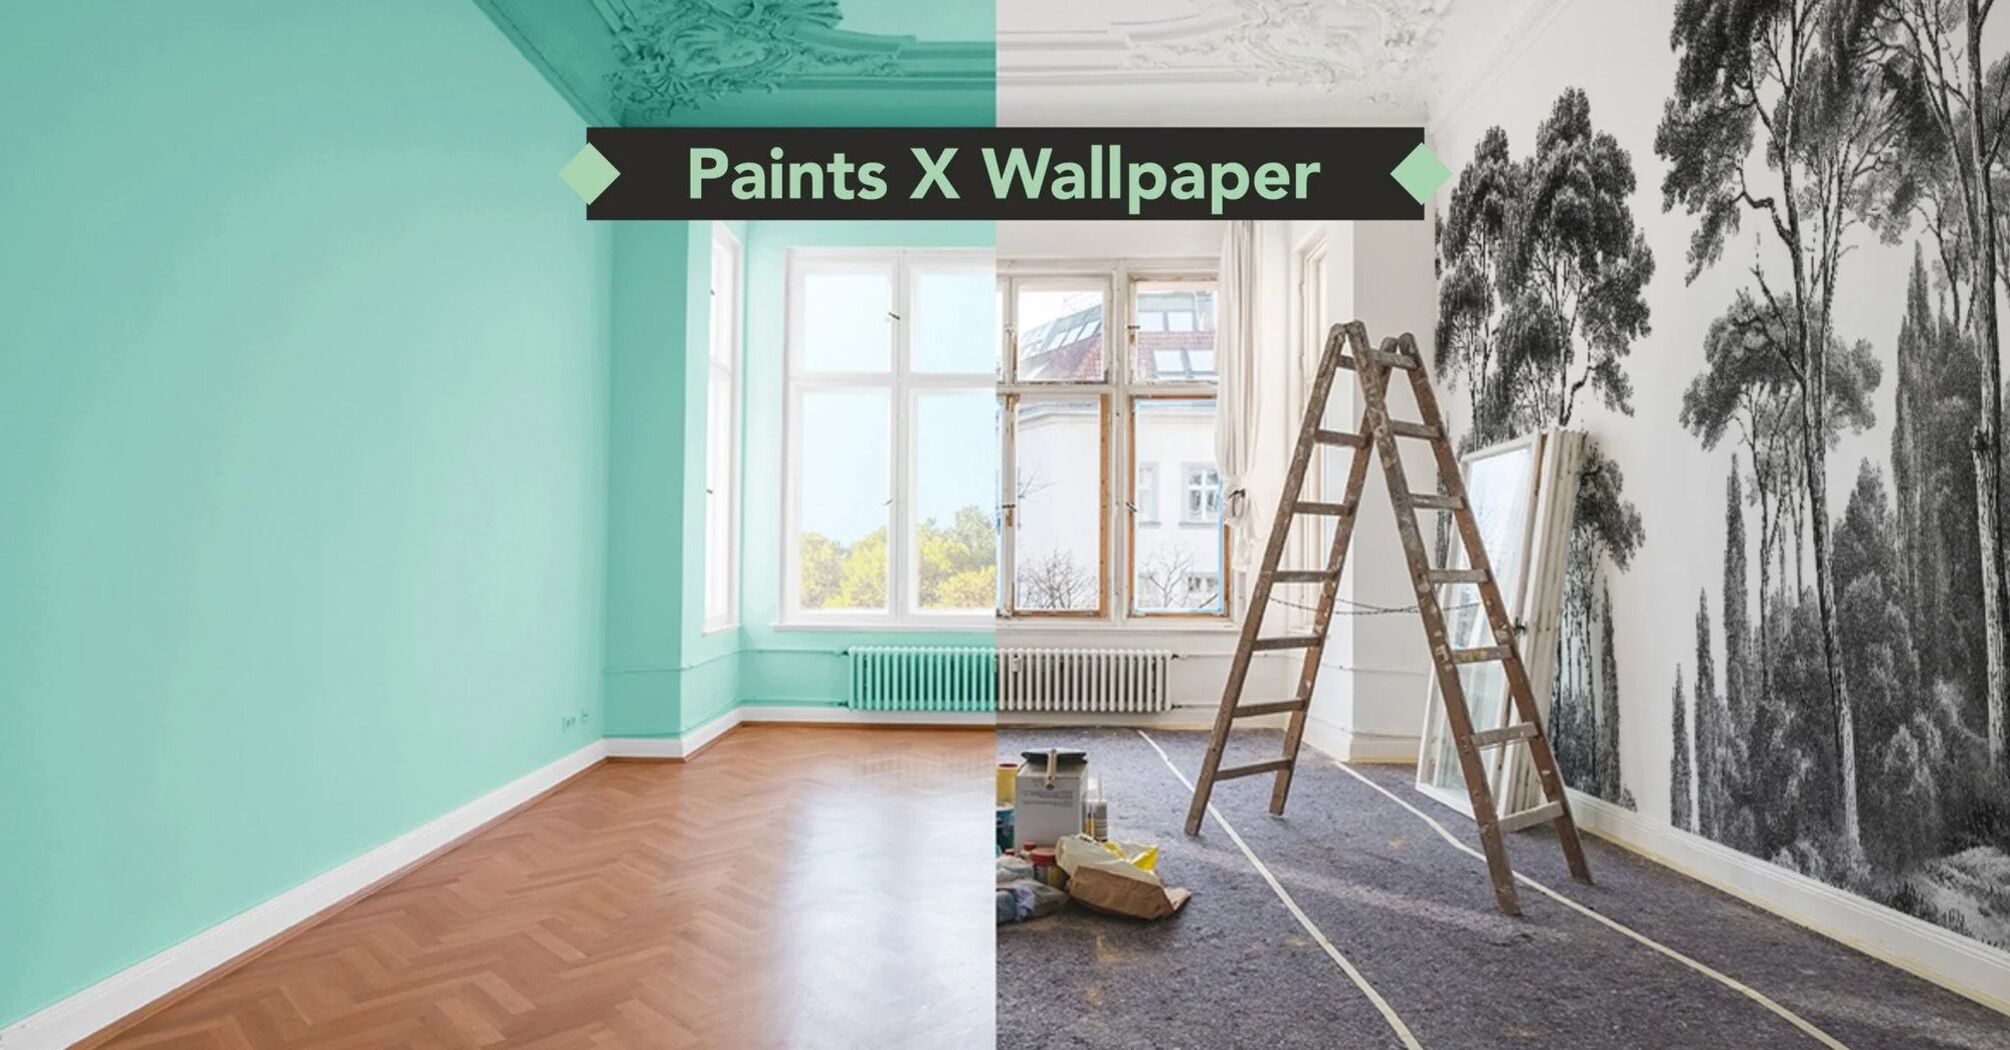 Wallpaper or painting